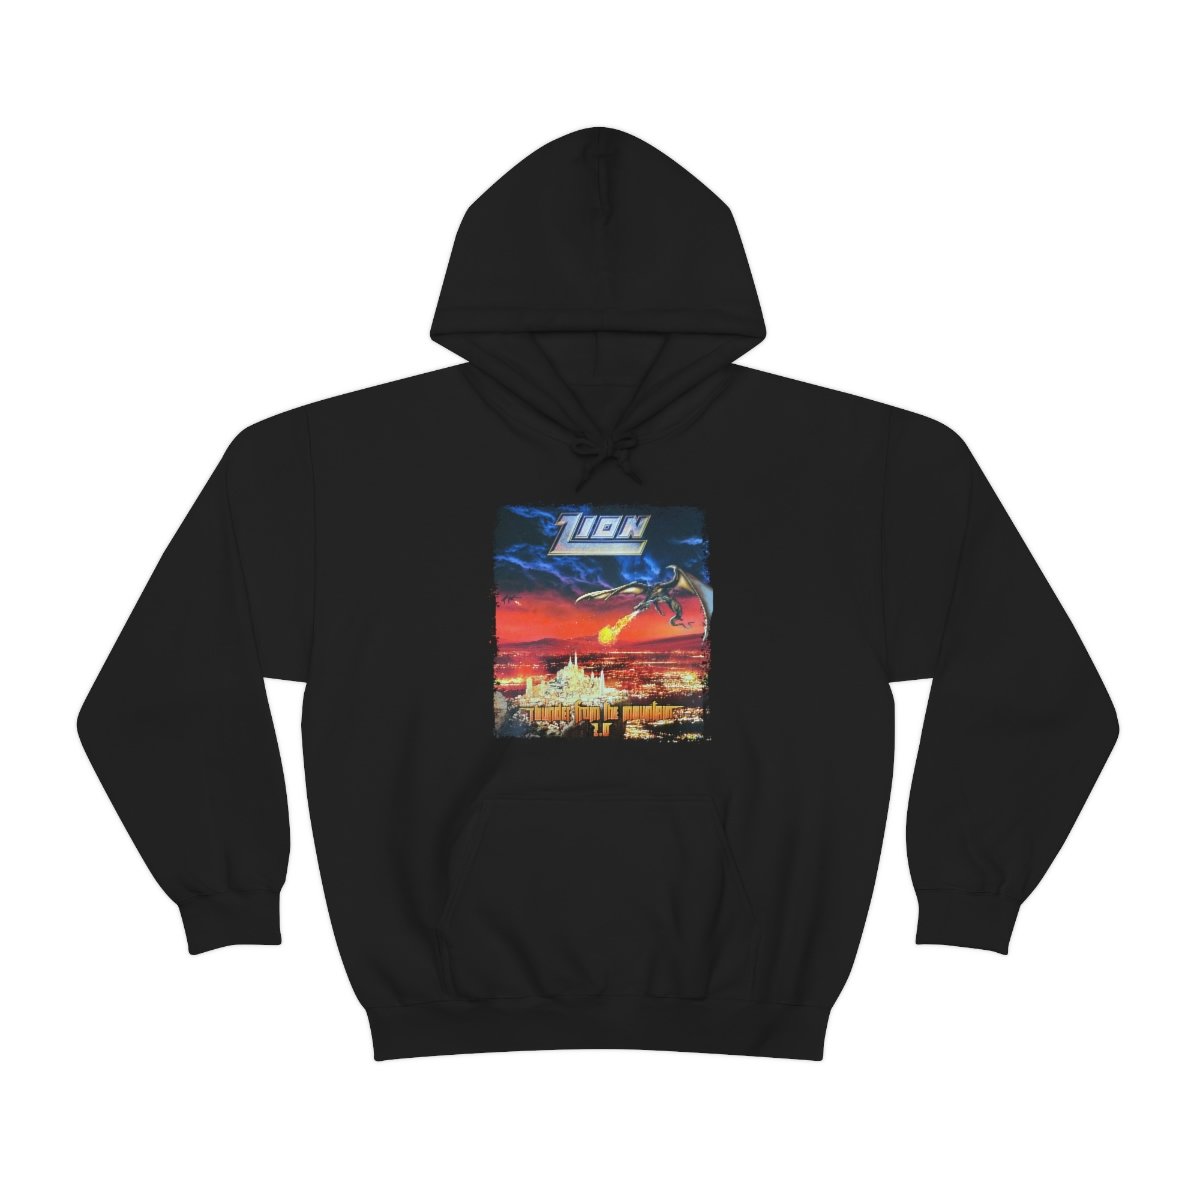 Zion – Thunder From The Mountain 2.0 Pullover Hooded Sweatshirt 185MD